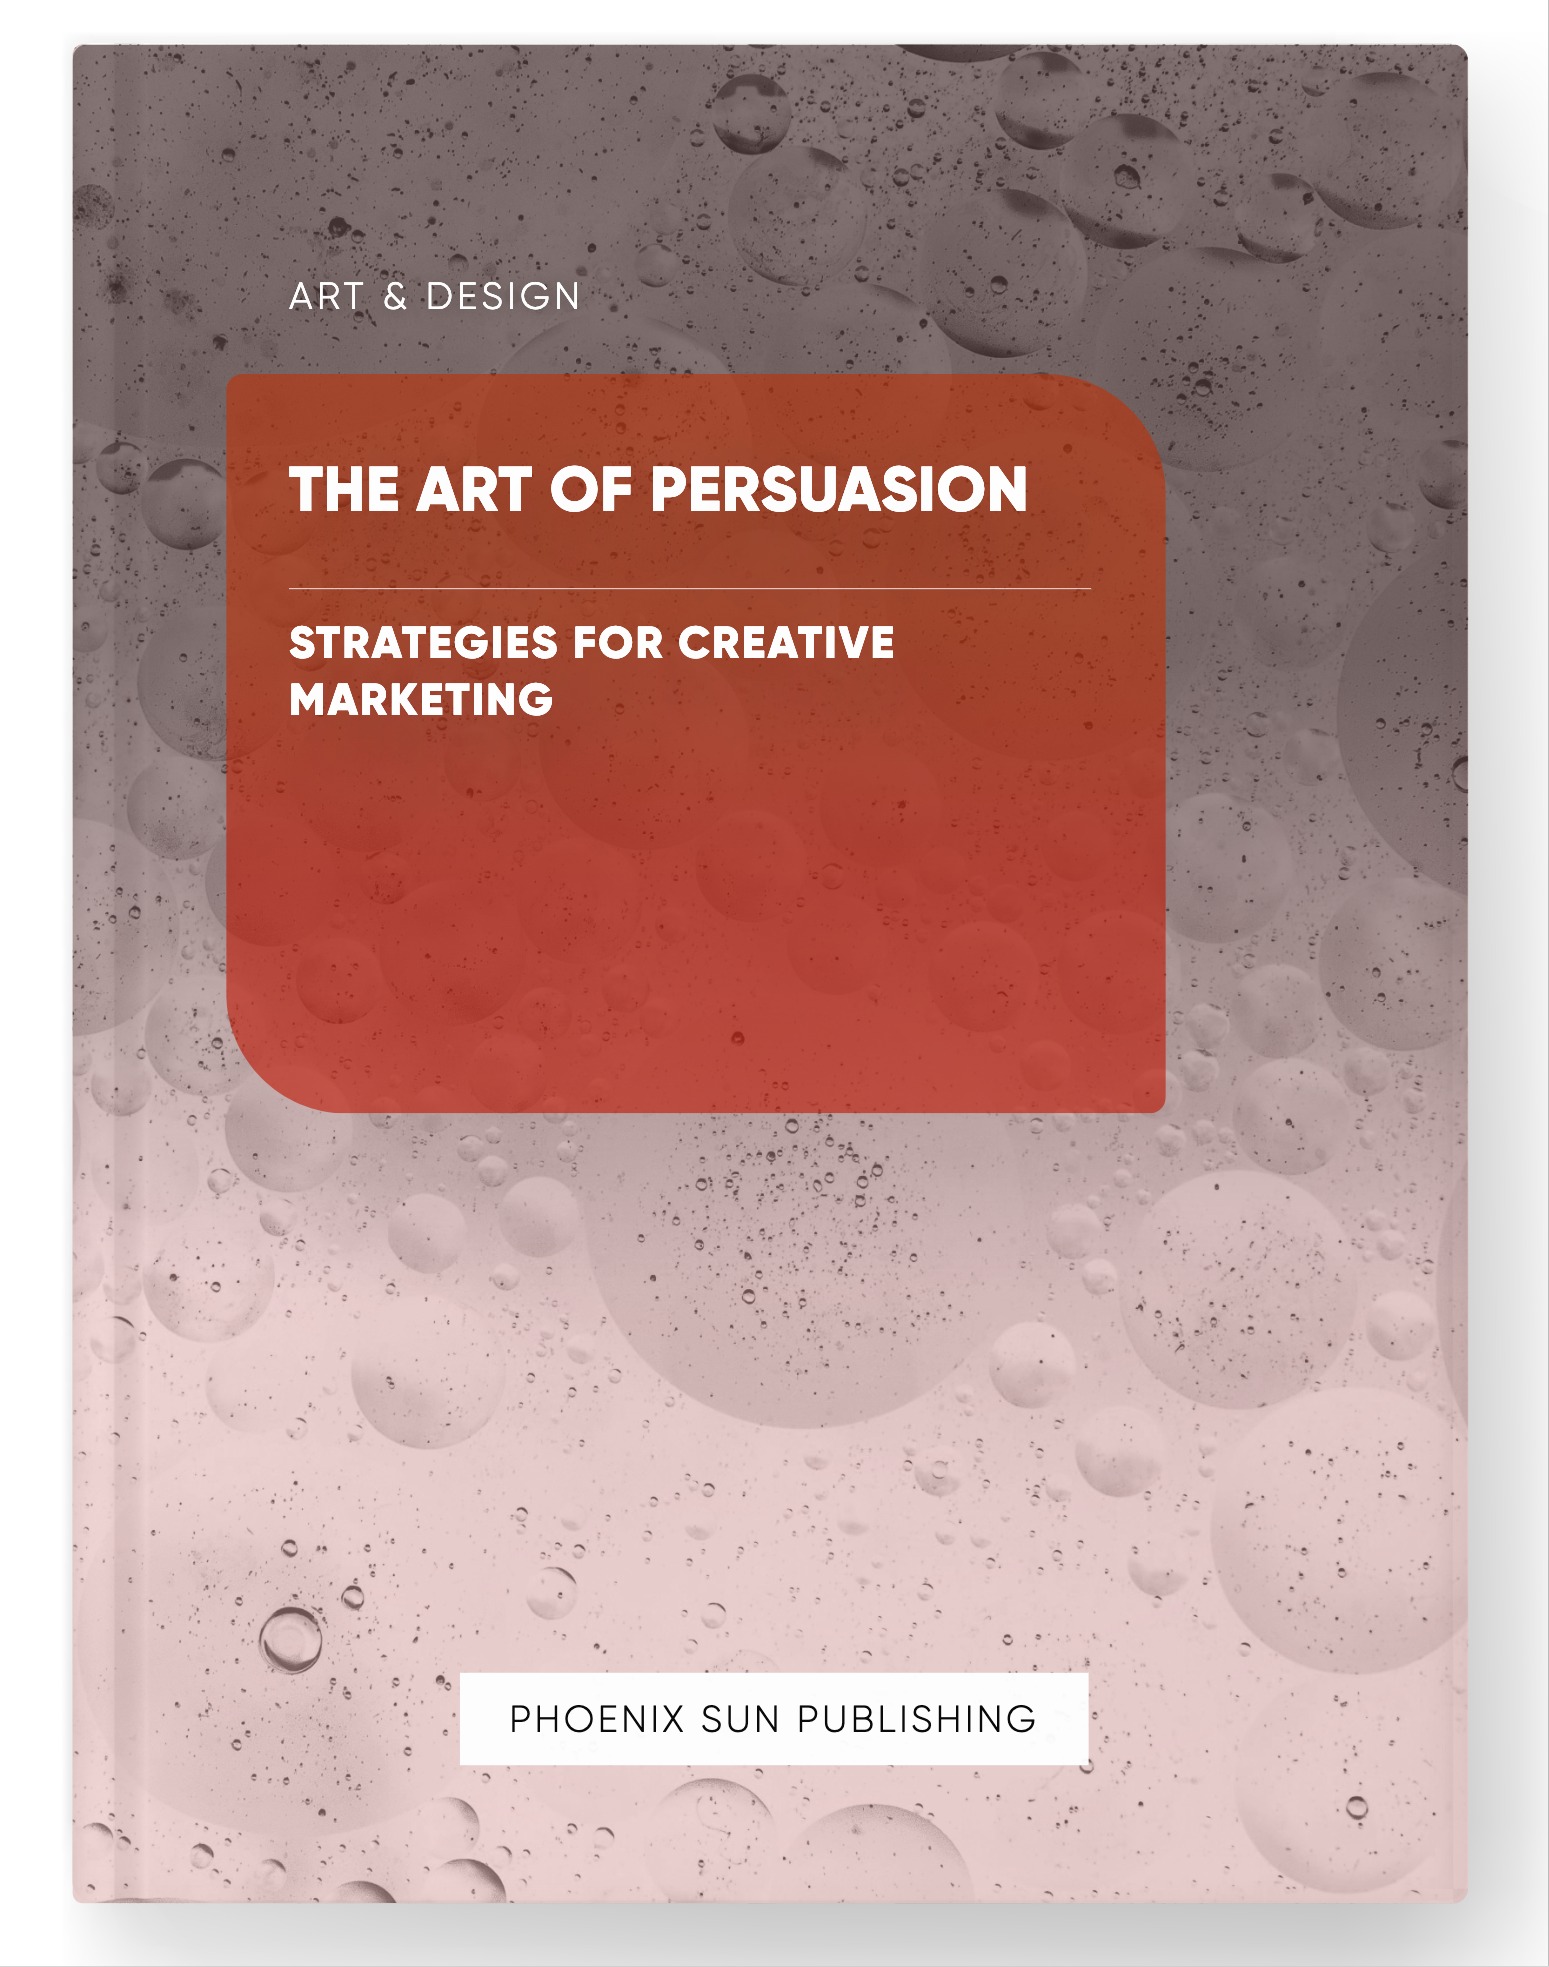 The Art of Persuasion – Strategies for Creative Marketing